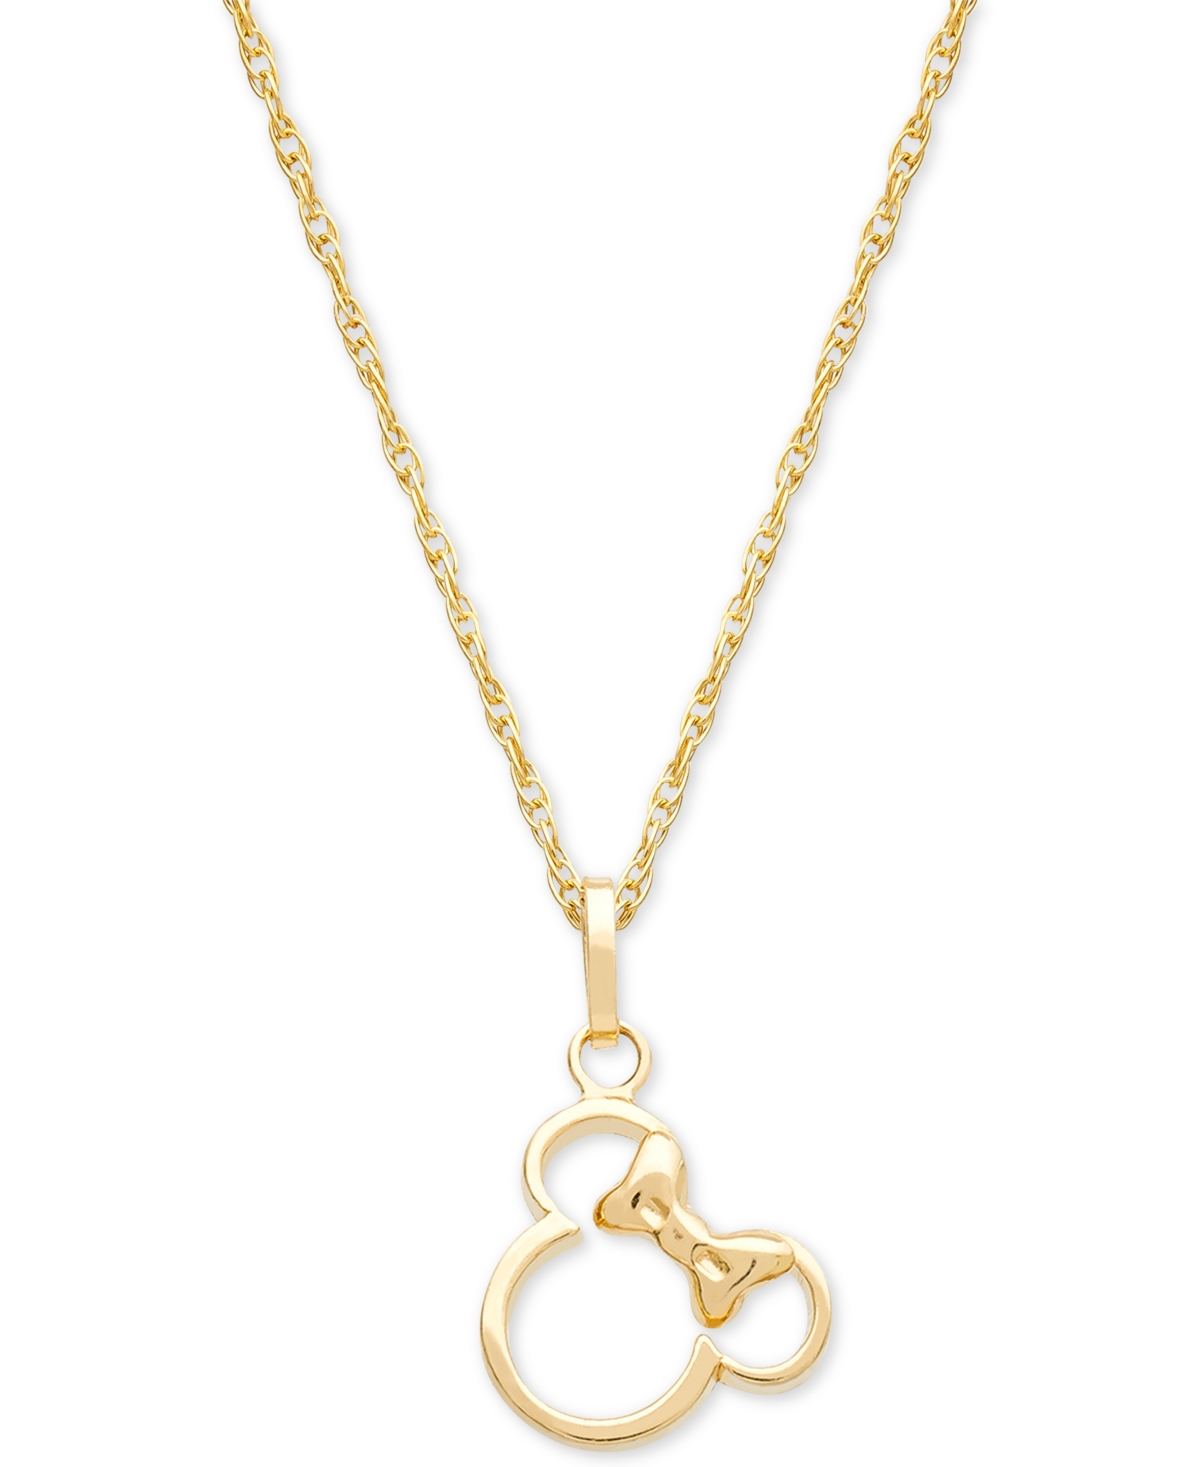 Children's Minnie Mouse Silhouette 15" Pendant Necklace in 14k Gold - Yellow Gold